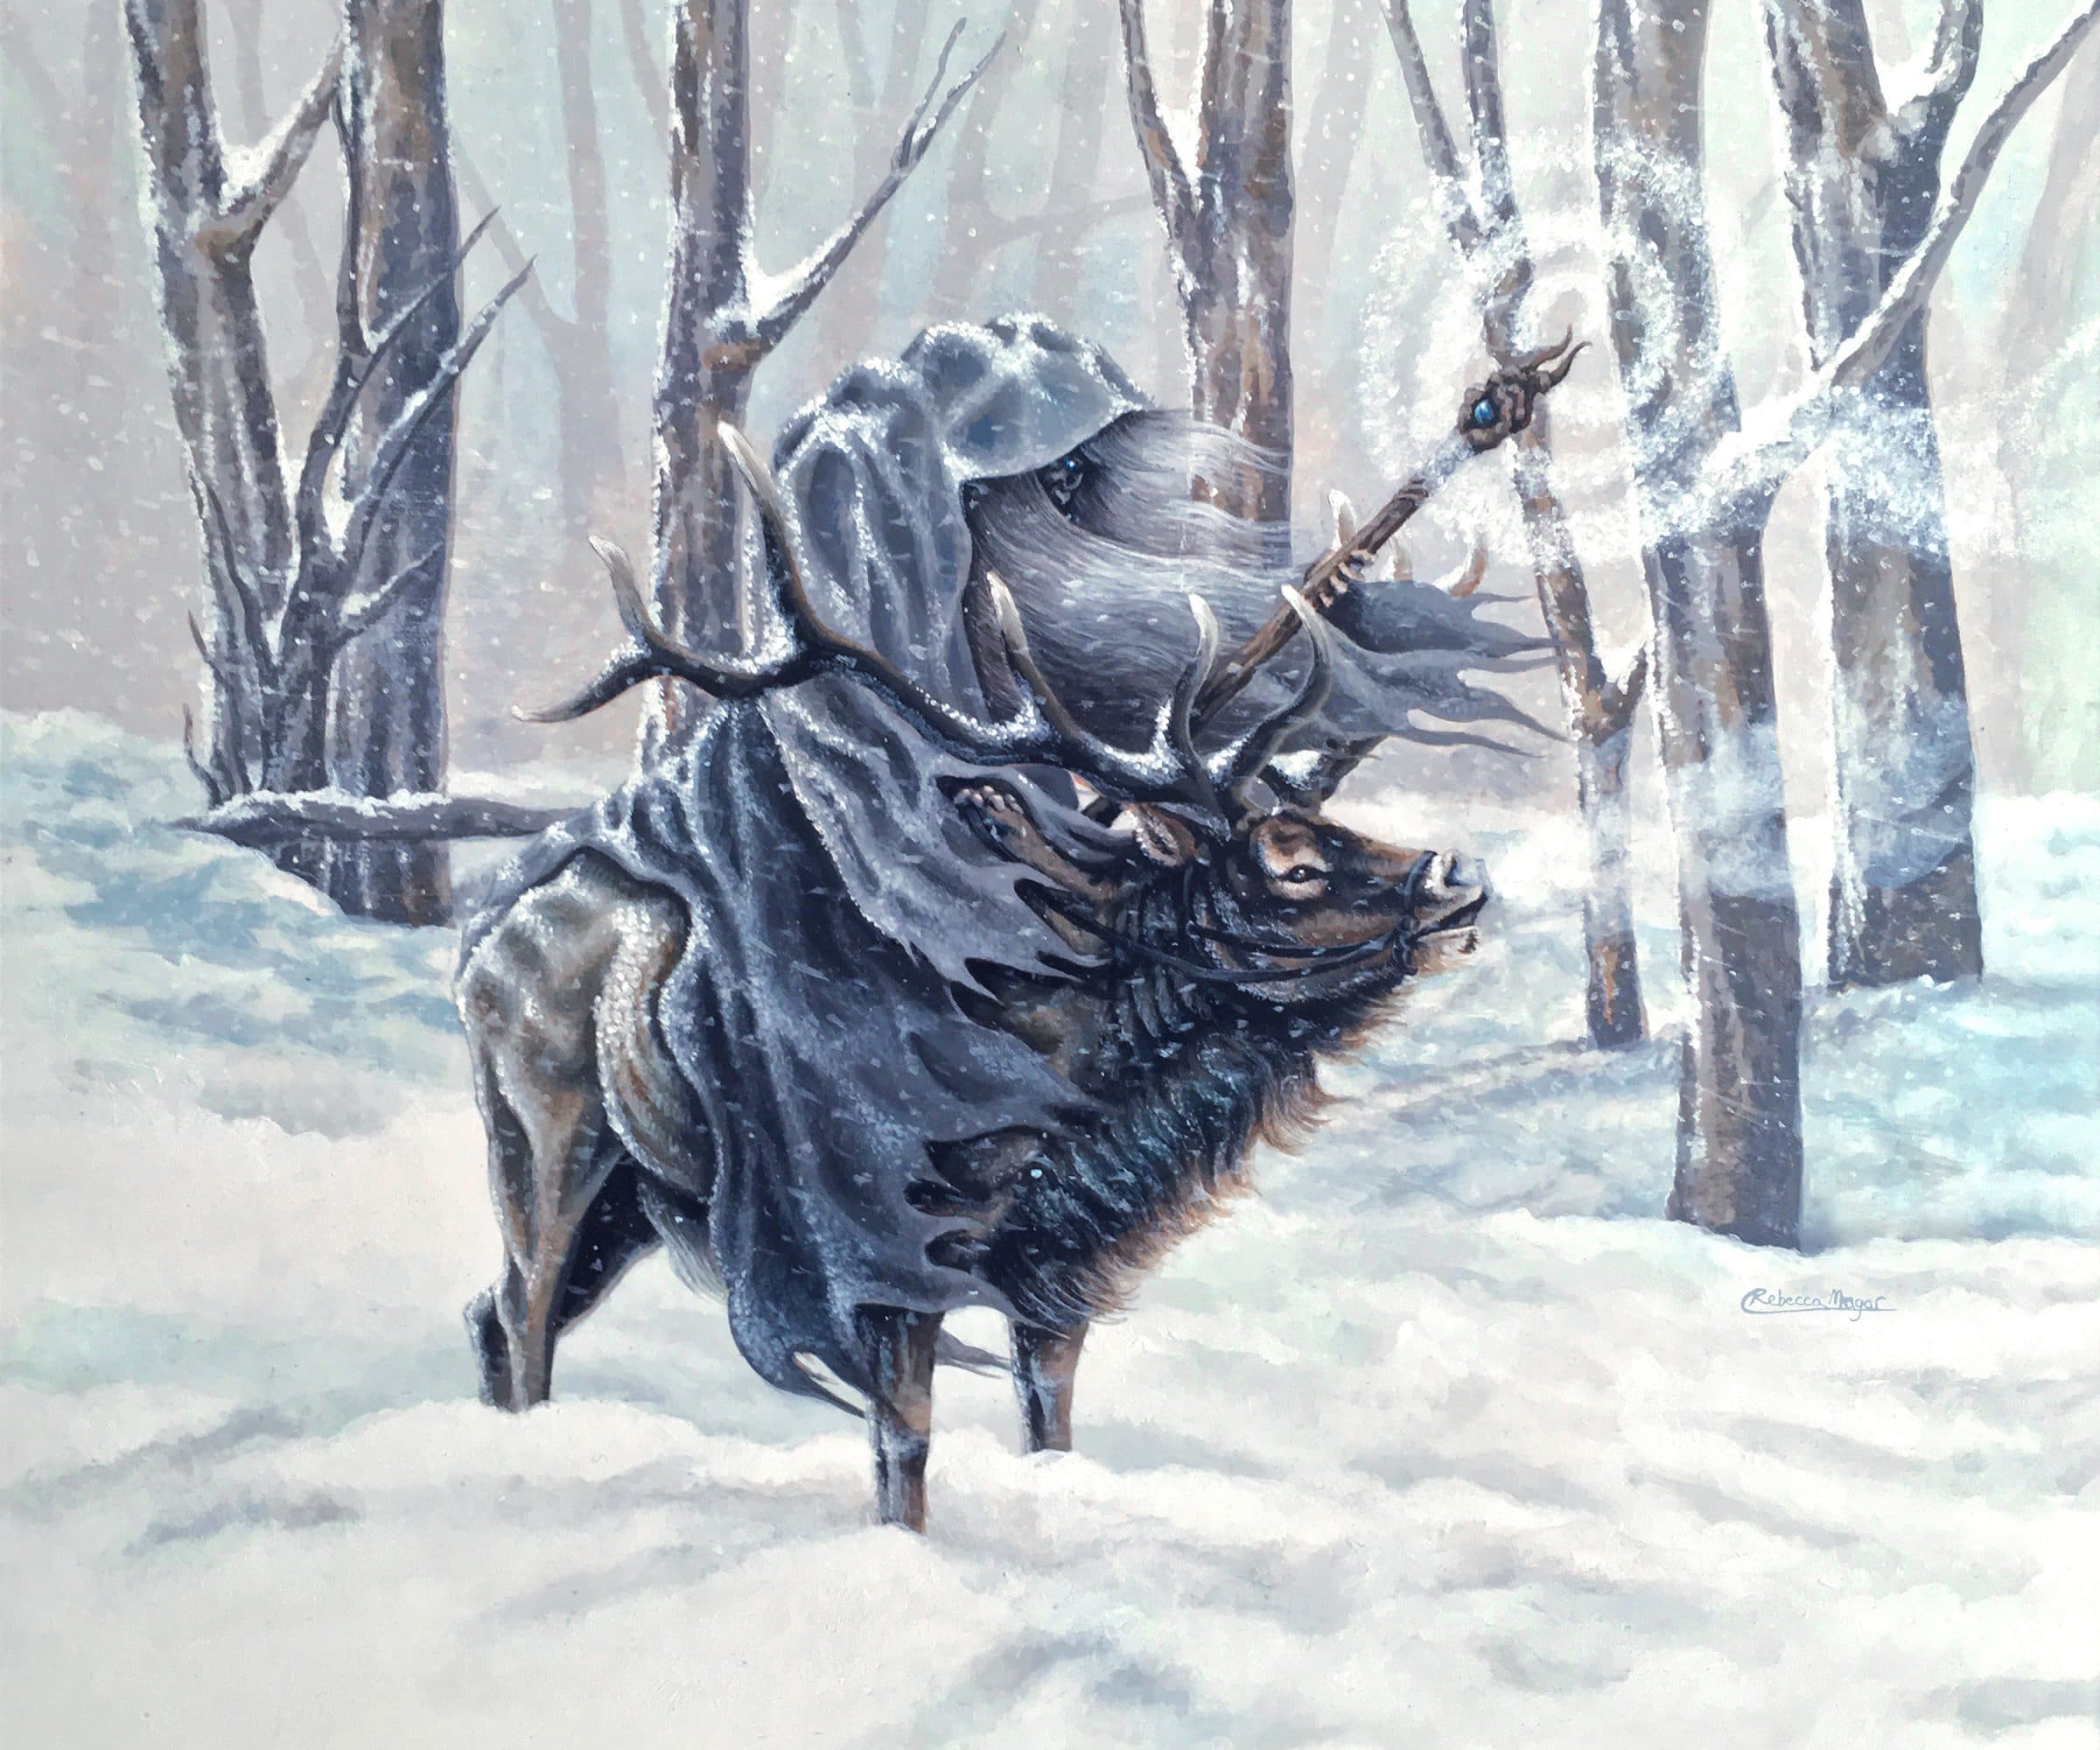 Blue Wizard - Painting of a Wizard in the Snow, Riding an Elk by Rebecca Magar